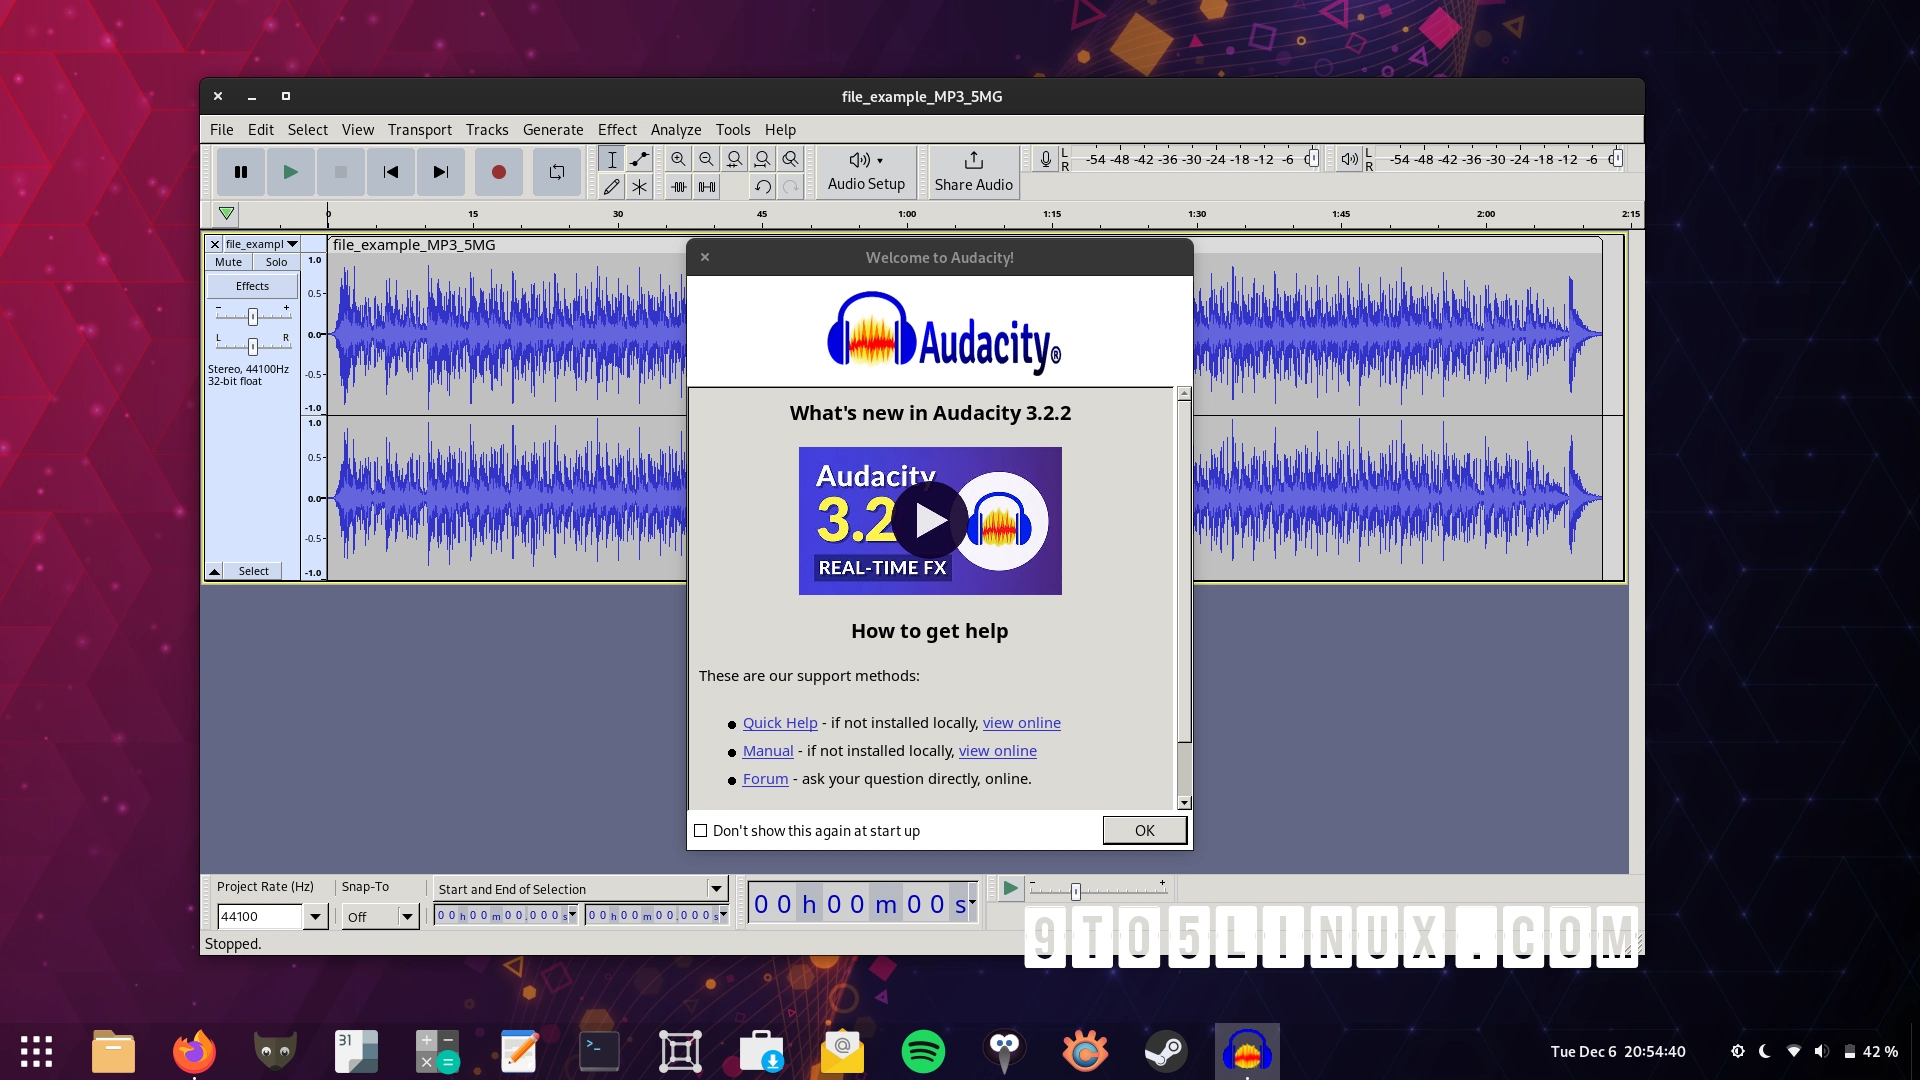 Audacity 3.2.2 Adds Realtime Capabilities to VST2 Effects, Improves Accessibility of Meters